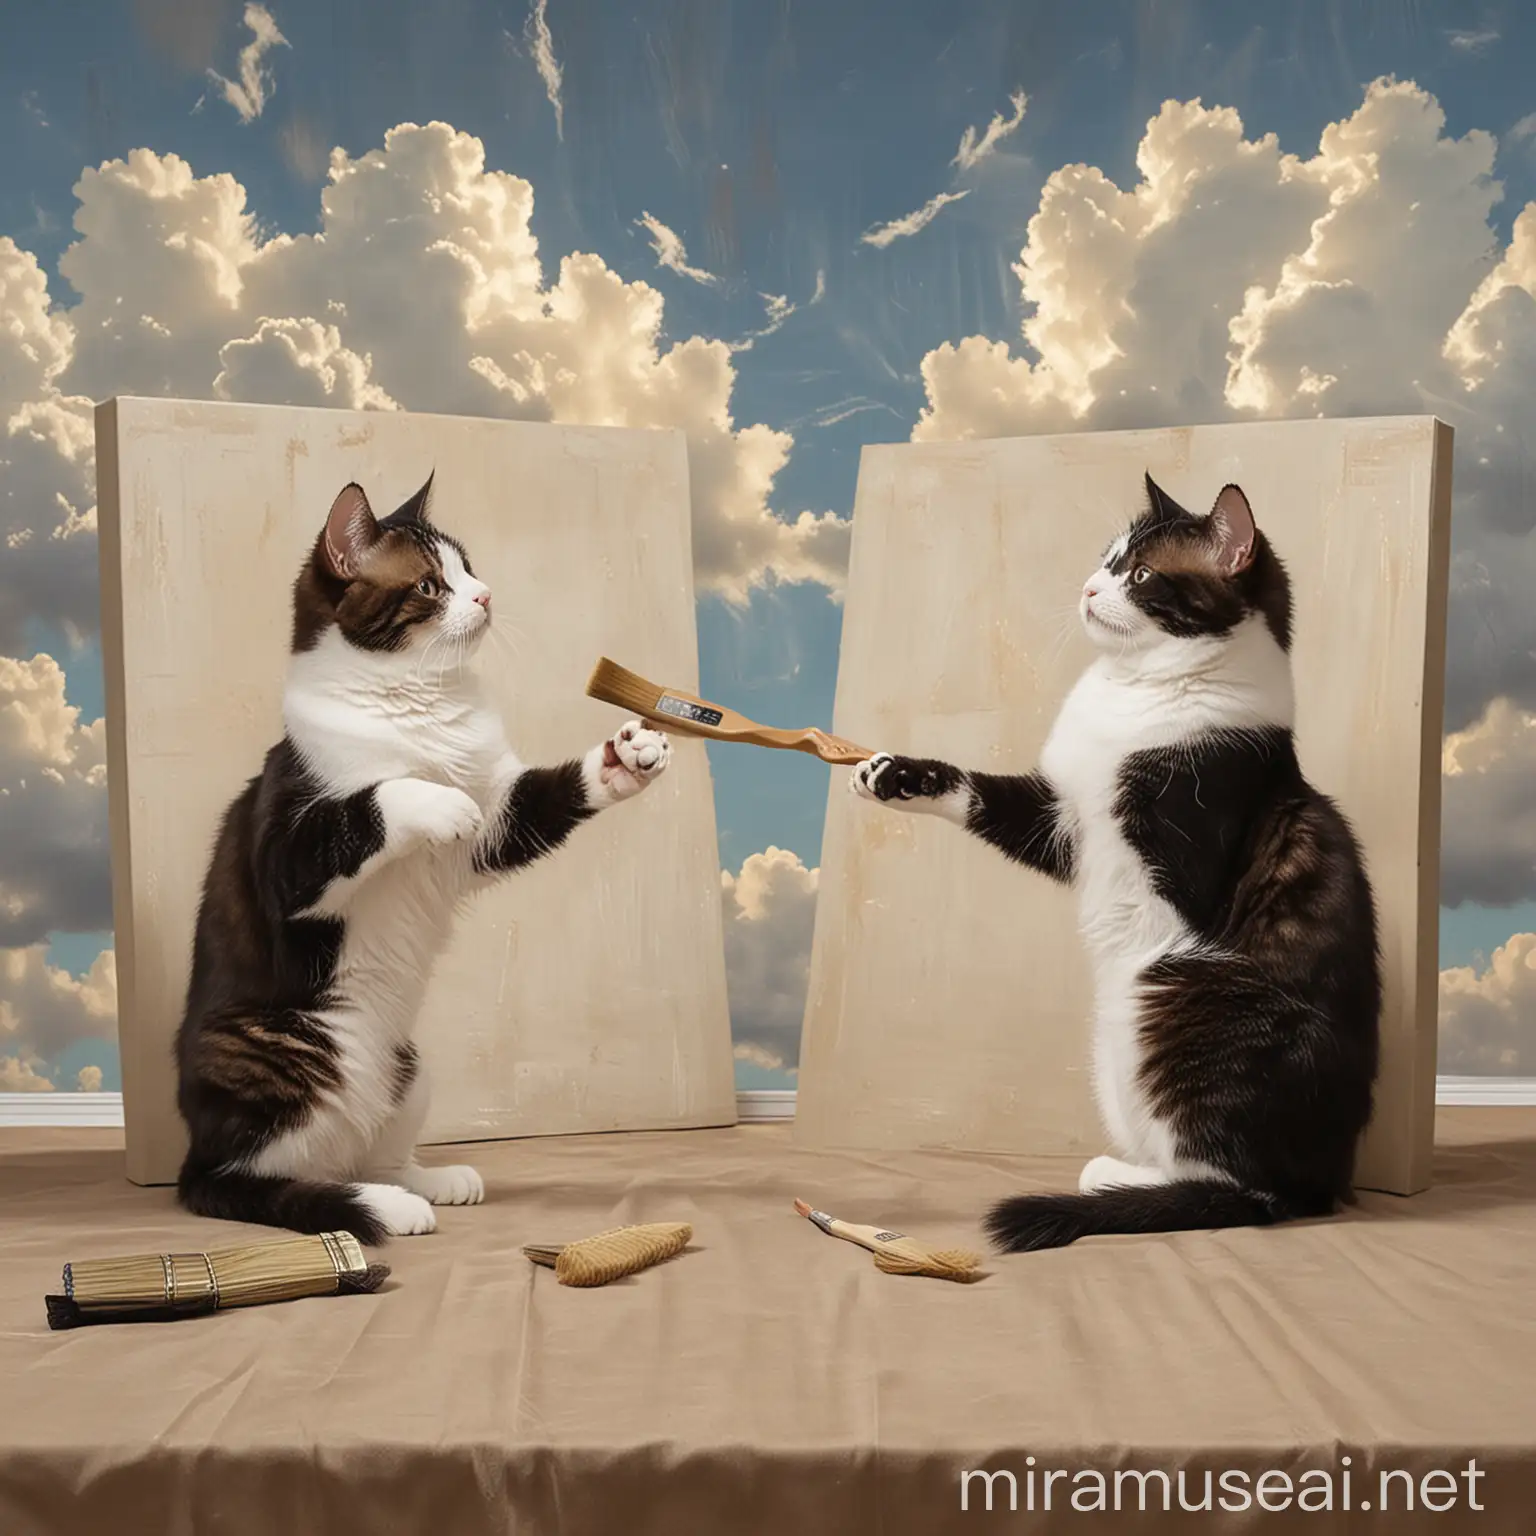 Two Cats Painting on Canvas with Cloudy Sky Background